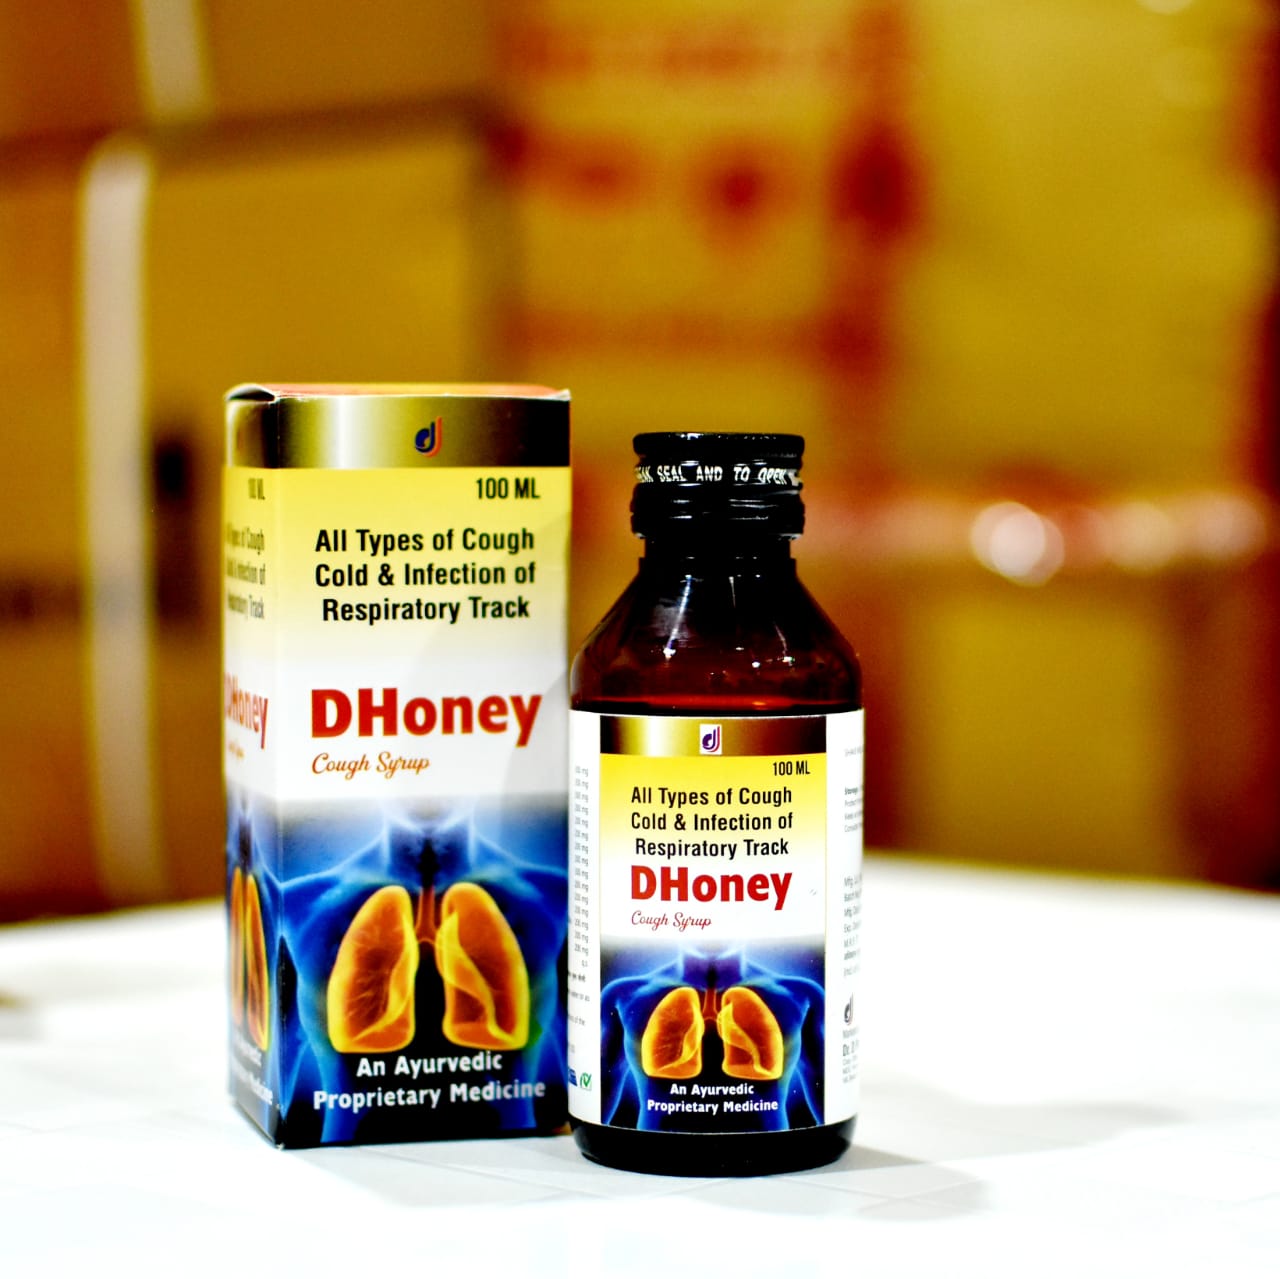 Ayurvedic Cough & Cold Syrup Manufacturer / Supplier and PCD Pharma Franchise